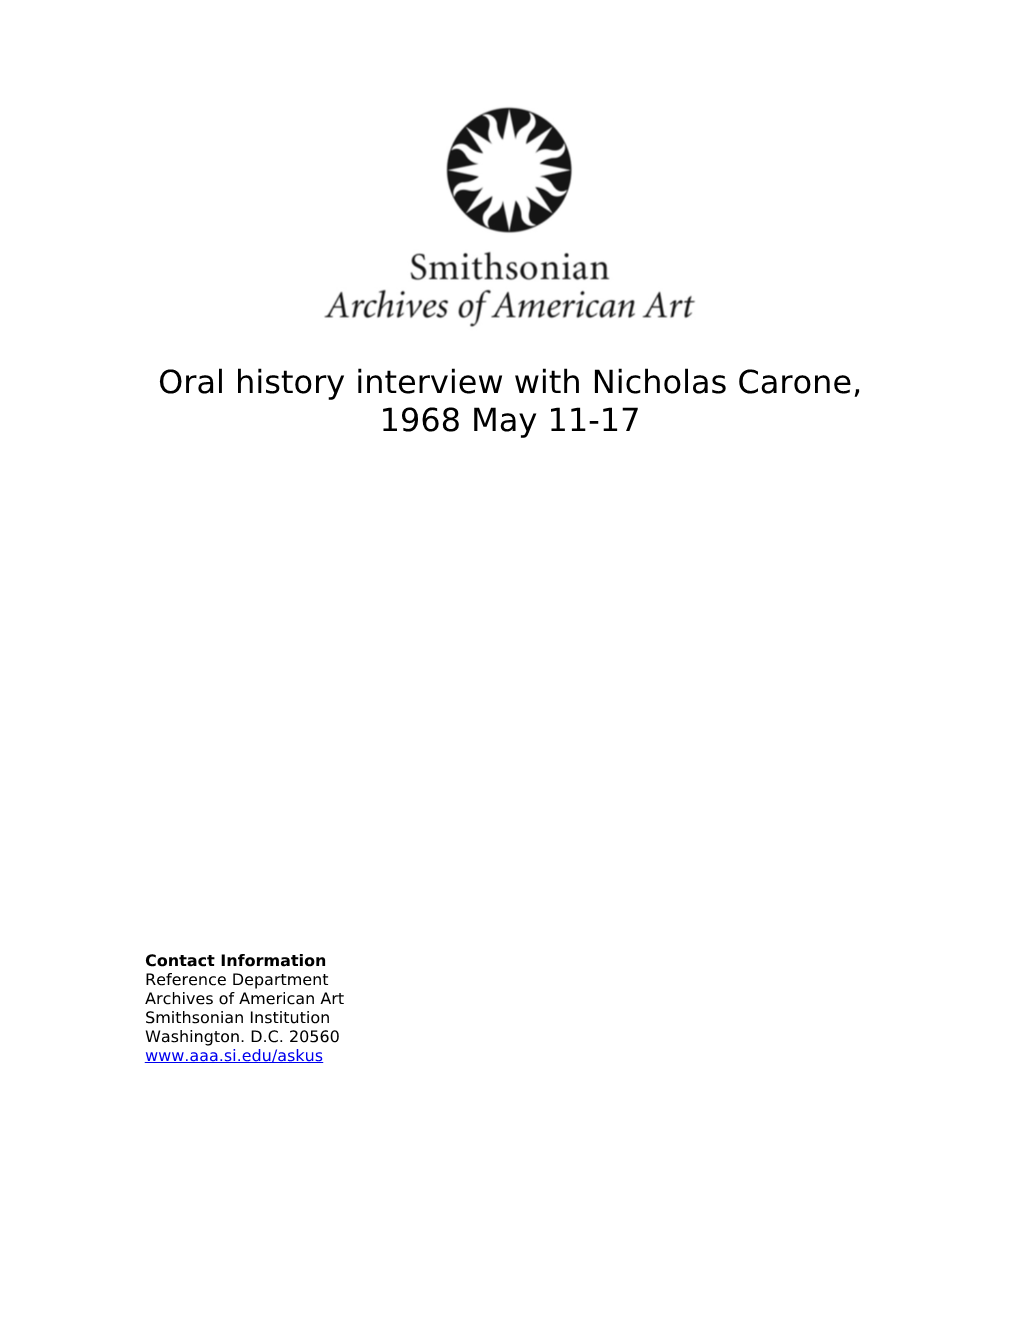 Oral History Interview with Nicholas Carone, 1968 May 11-17